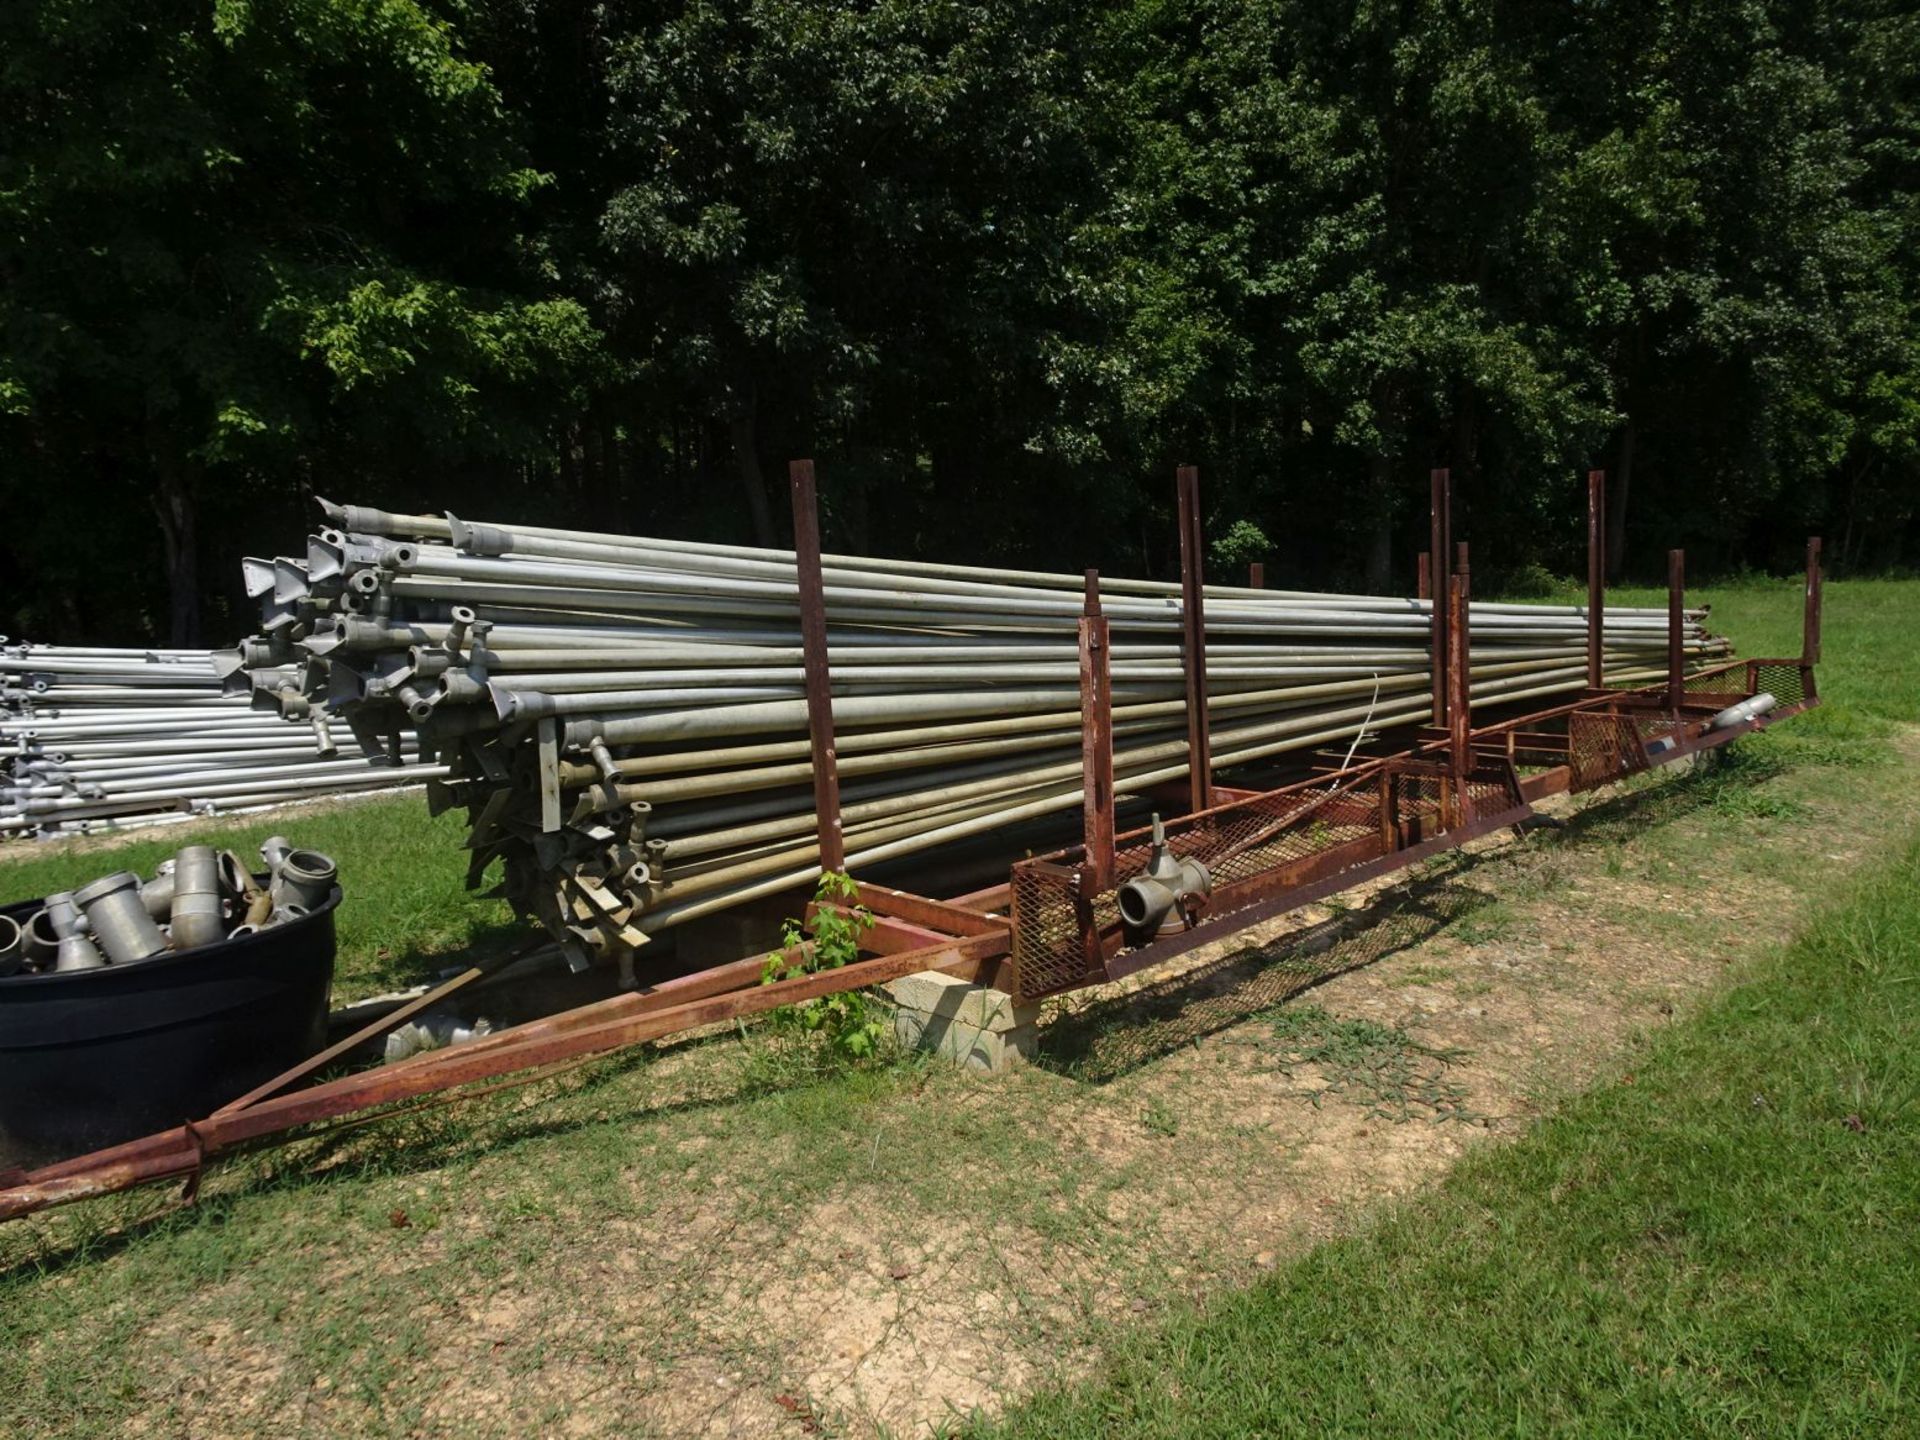 Large Qty of Rainway Quick Connect 2" Diameter Irrigation Pipes Varying Lengths, (1) Trailer Frame - Image 3 of 7